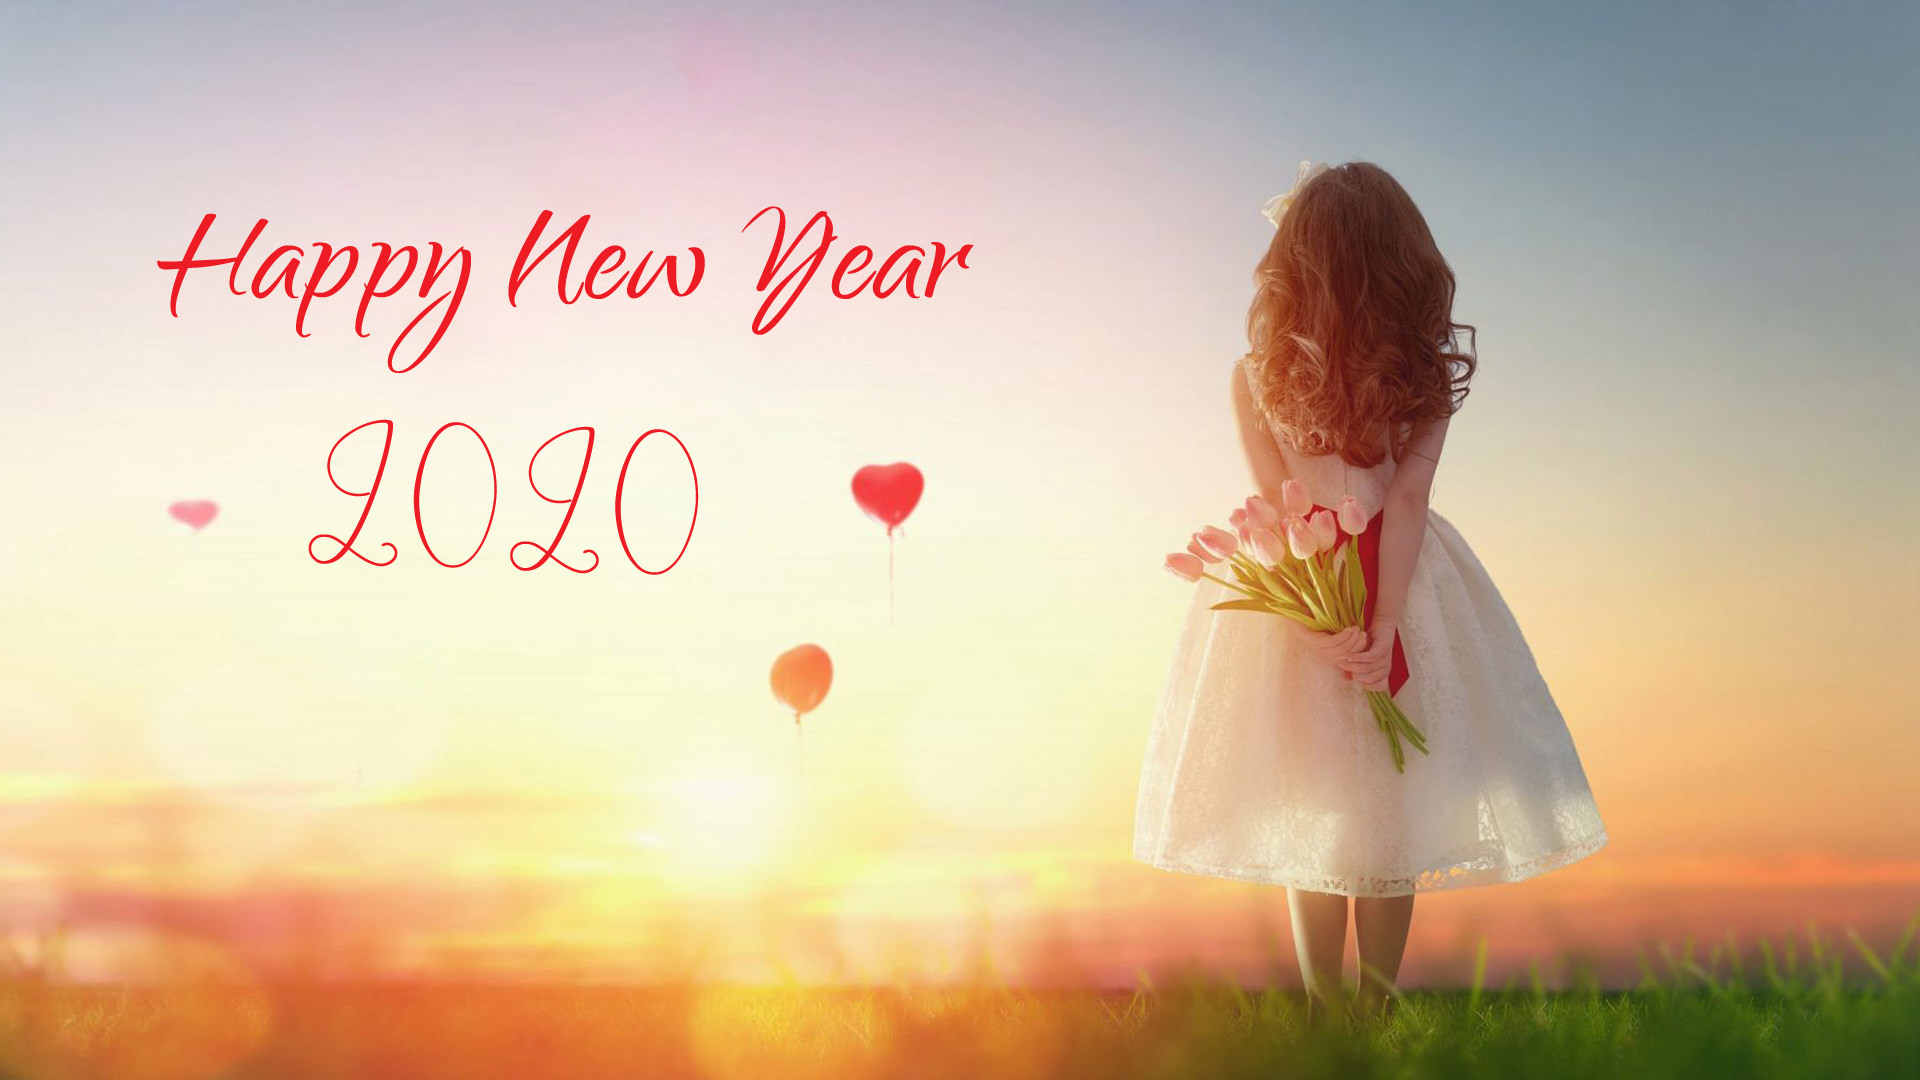 Alone Girl with Flowers New Year 2020 Wishes Wallpaper